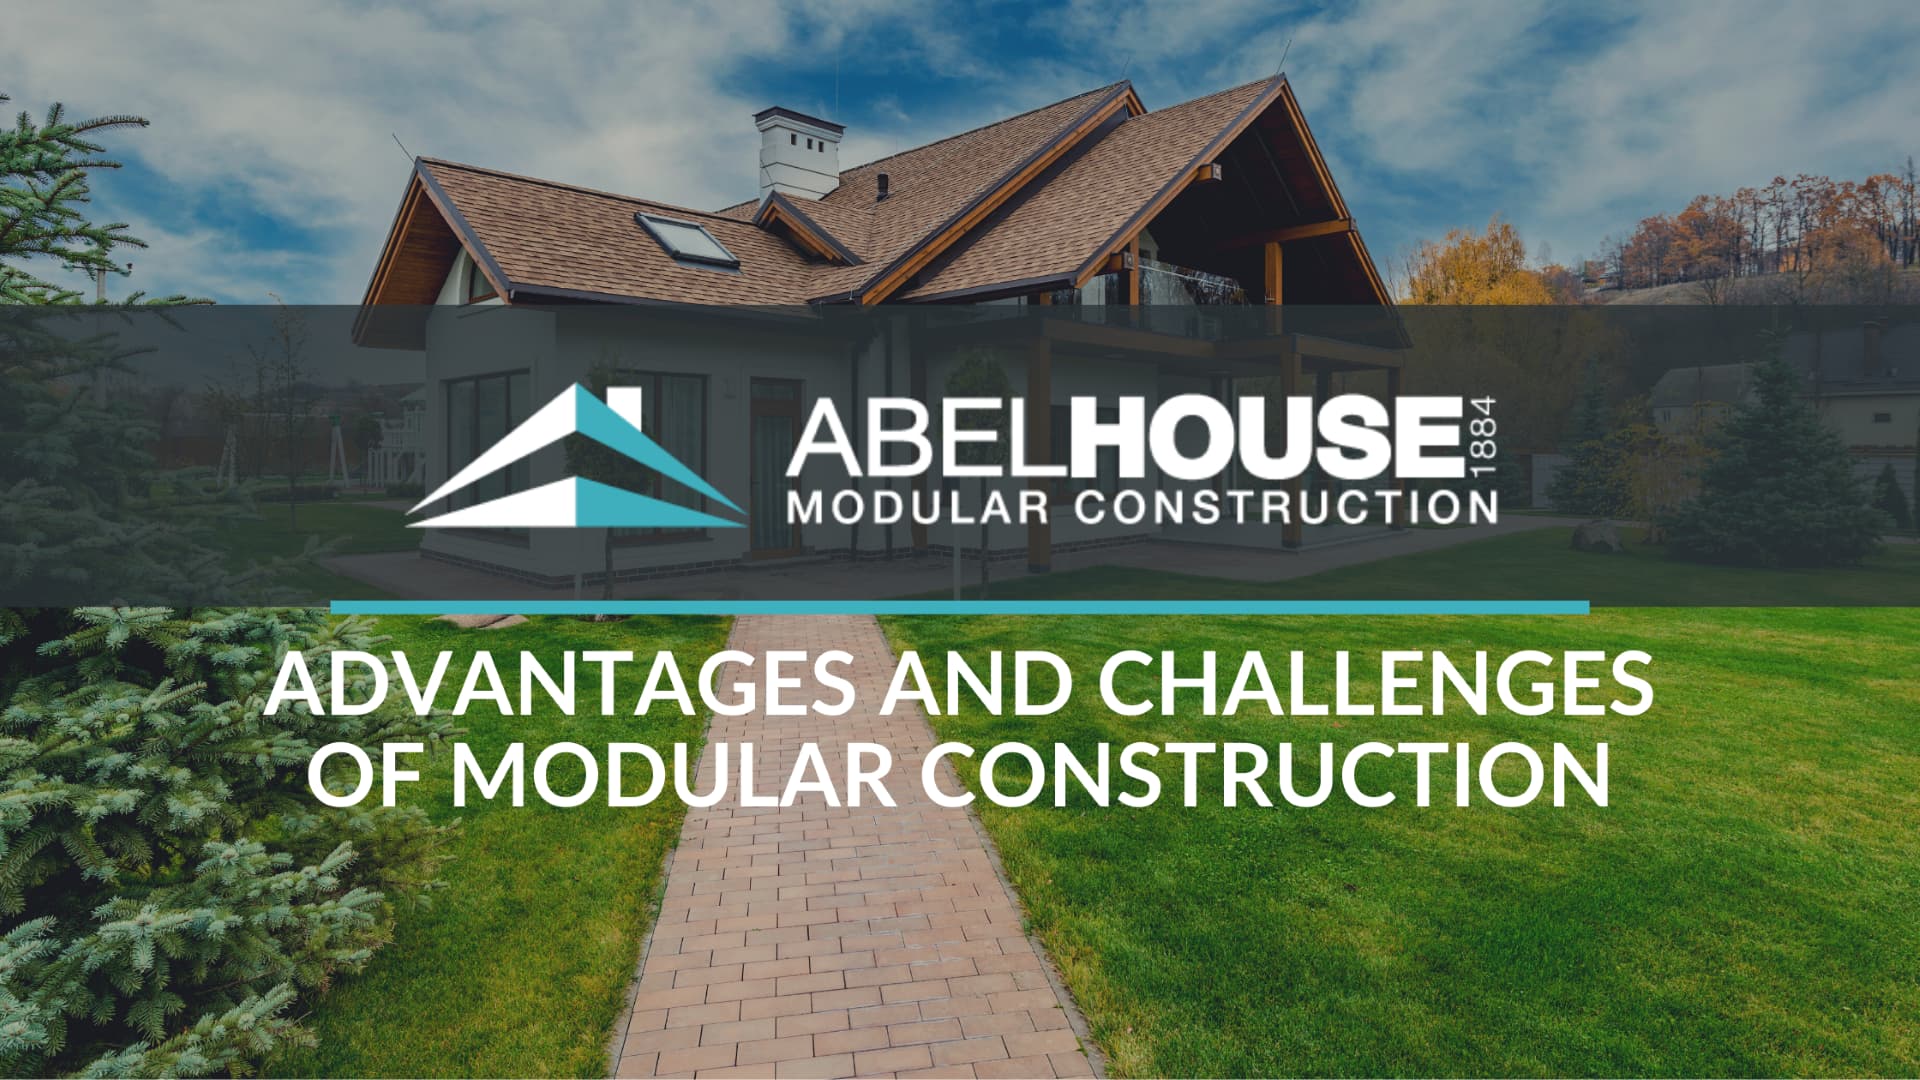 Advantages and challenges of modular construction